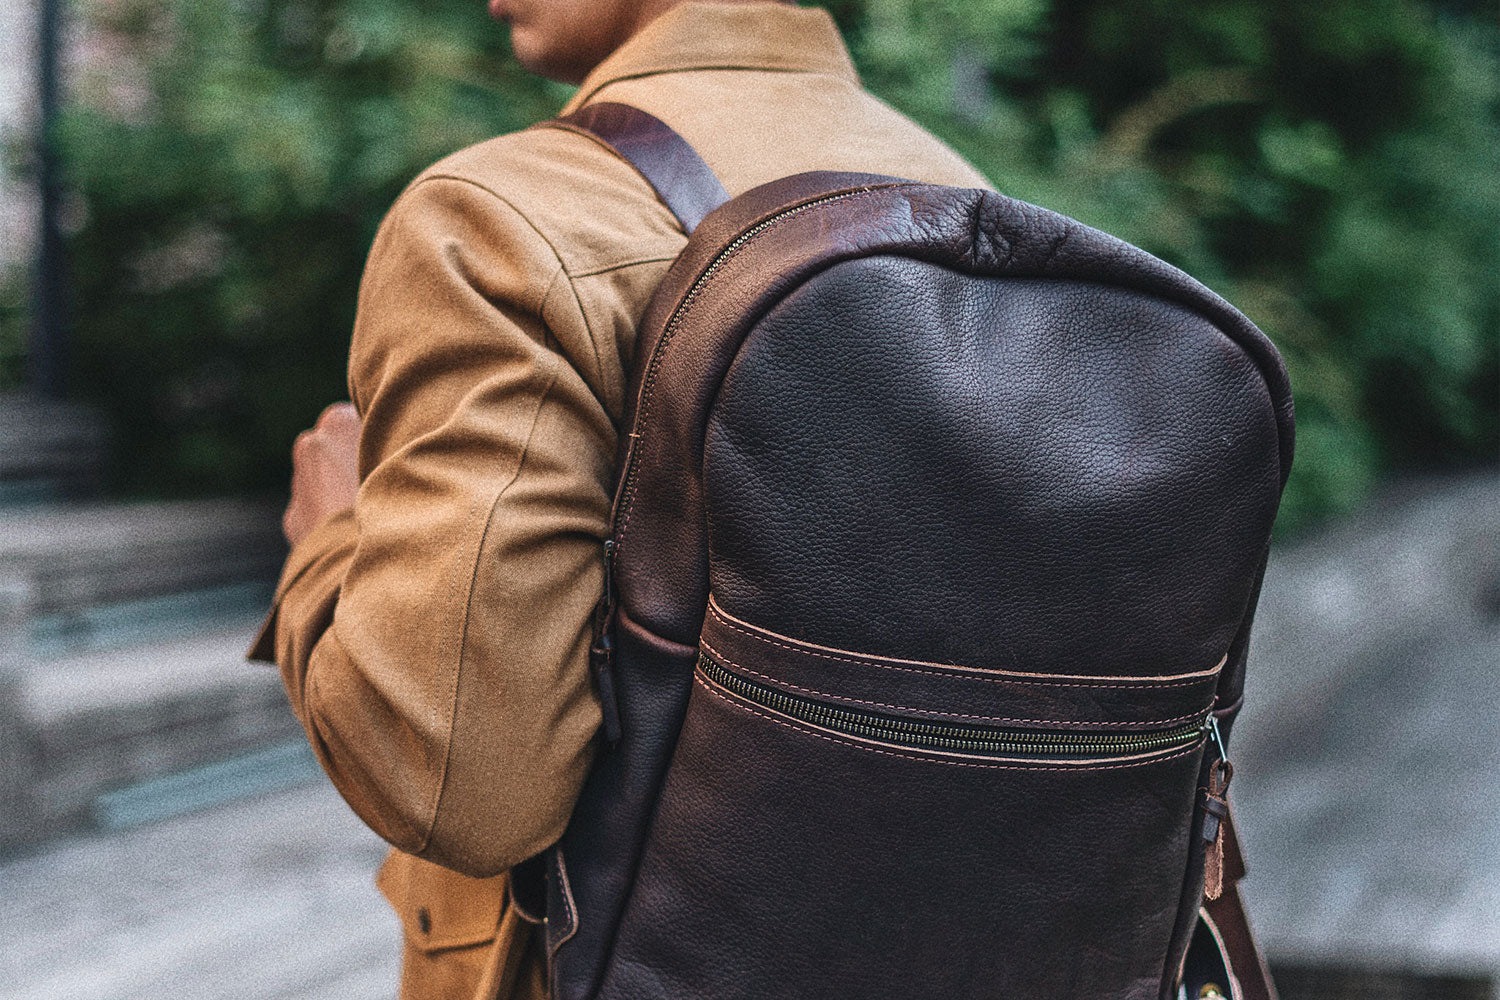 CLASSIC ZIPPERED LEATHER BACKPACK - Go Forth Goods ®